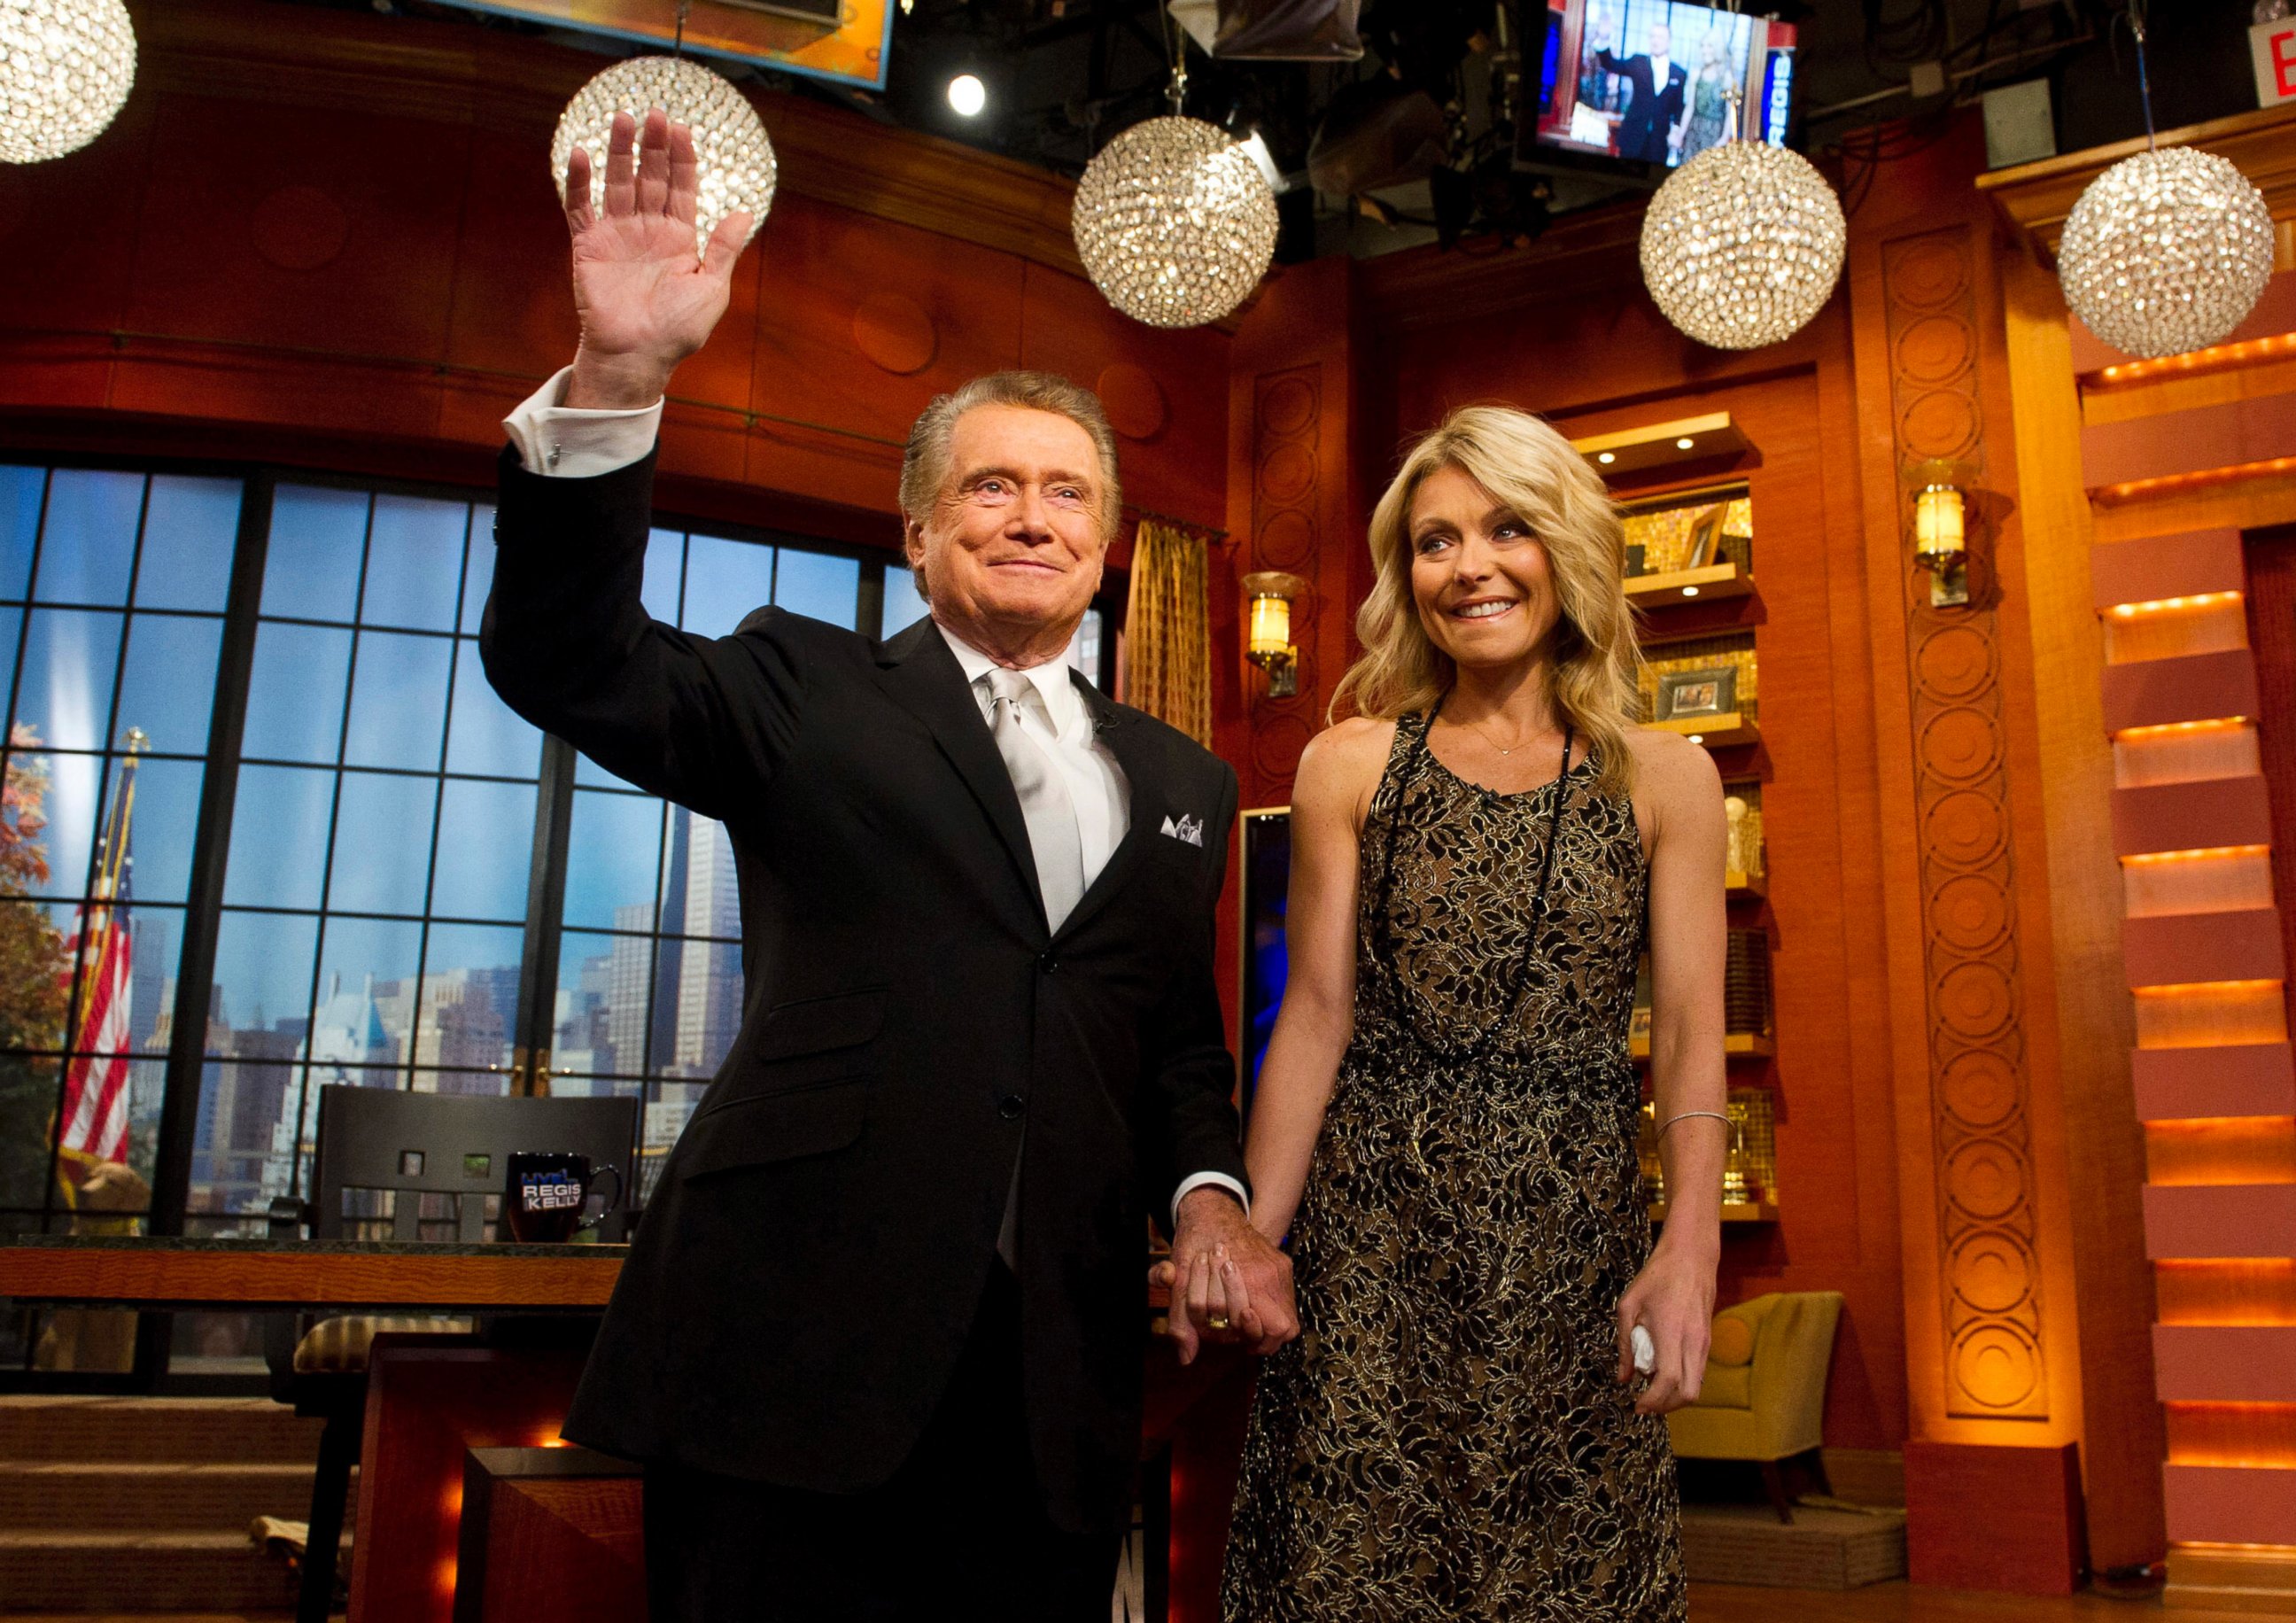 PHOTO: In this Friday, Nov. 18, 2011, file photo, Regis Philbin and Kelly Ripa appear on Regis' farewell episode of "Live! with Regis and Kelly", in New York.